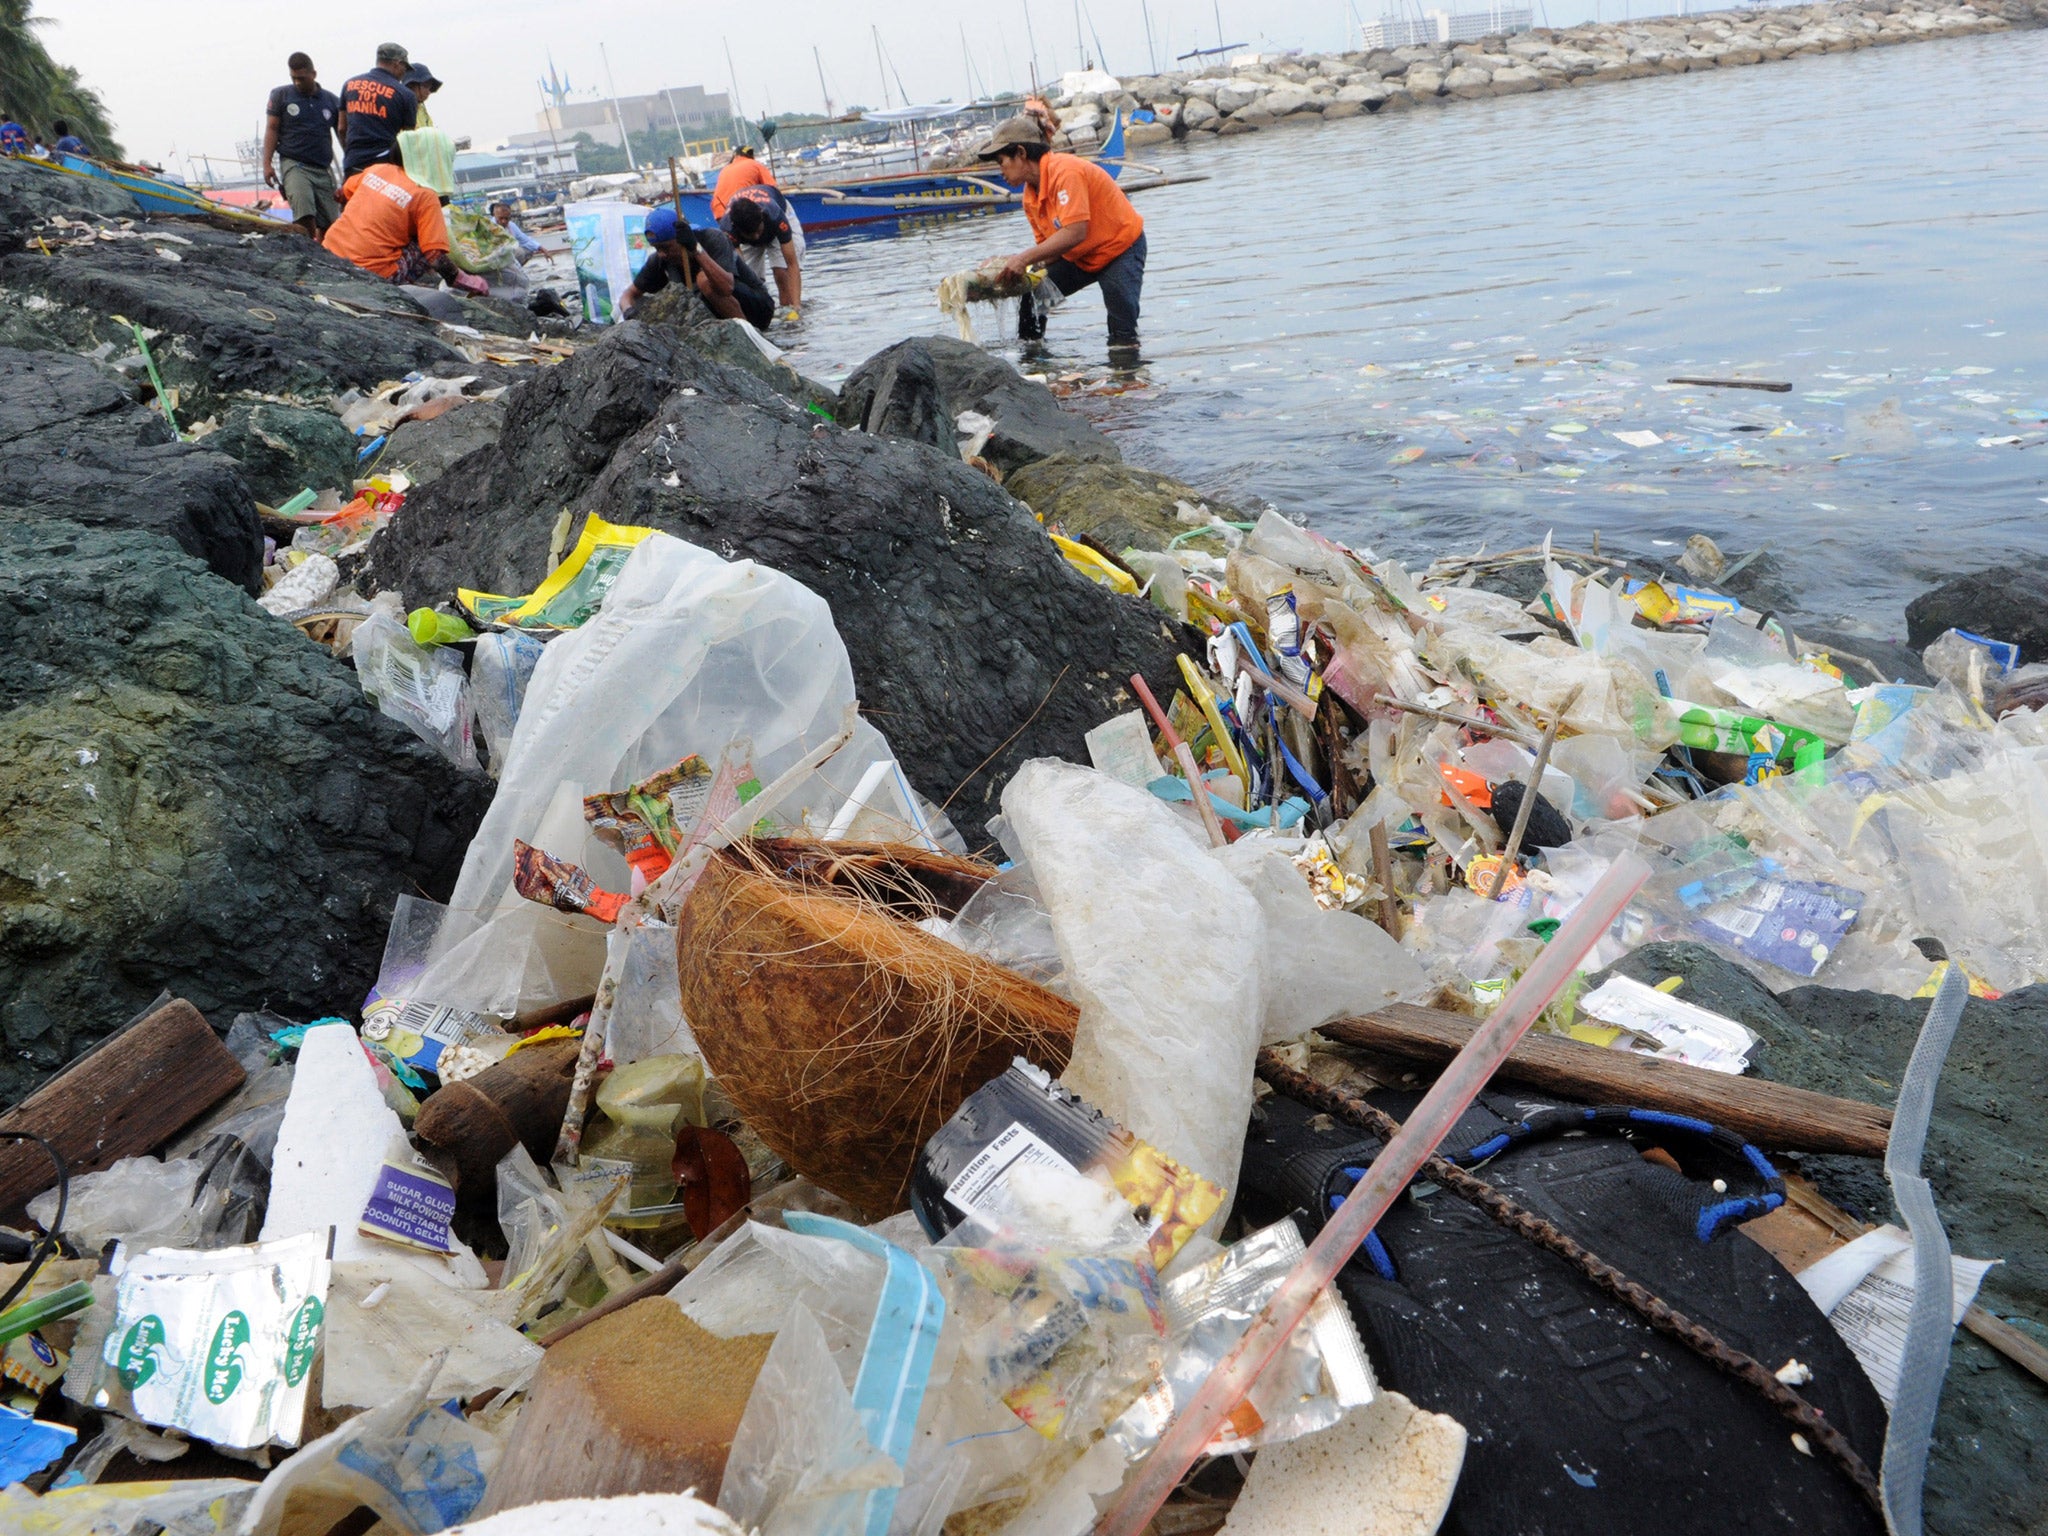 Plastic bags and other rubbish are collected from the waters of Manila Bay during a campaign by environmental activists earlier this year